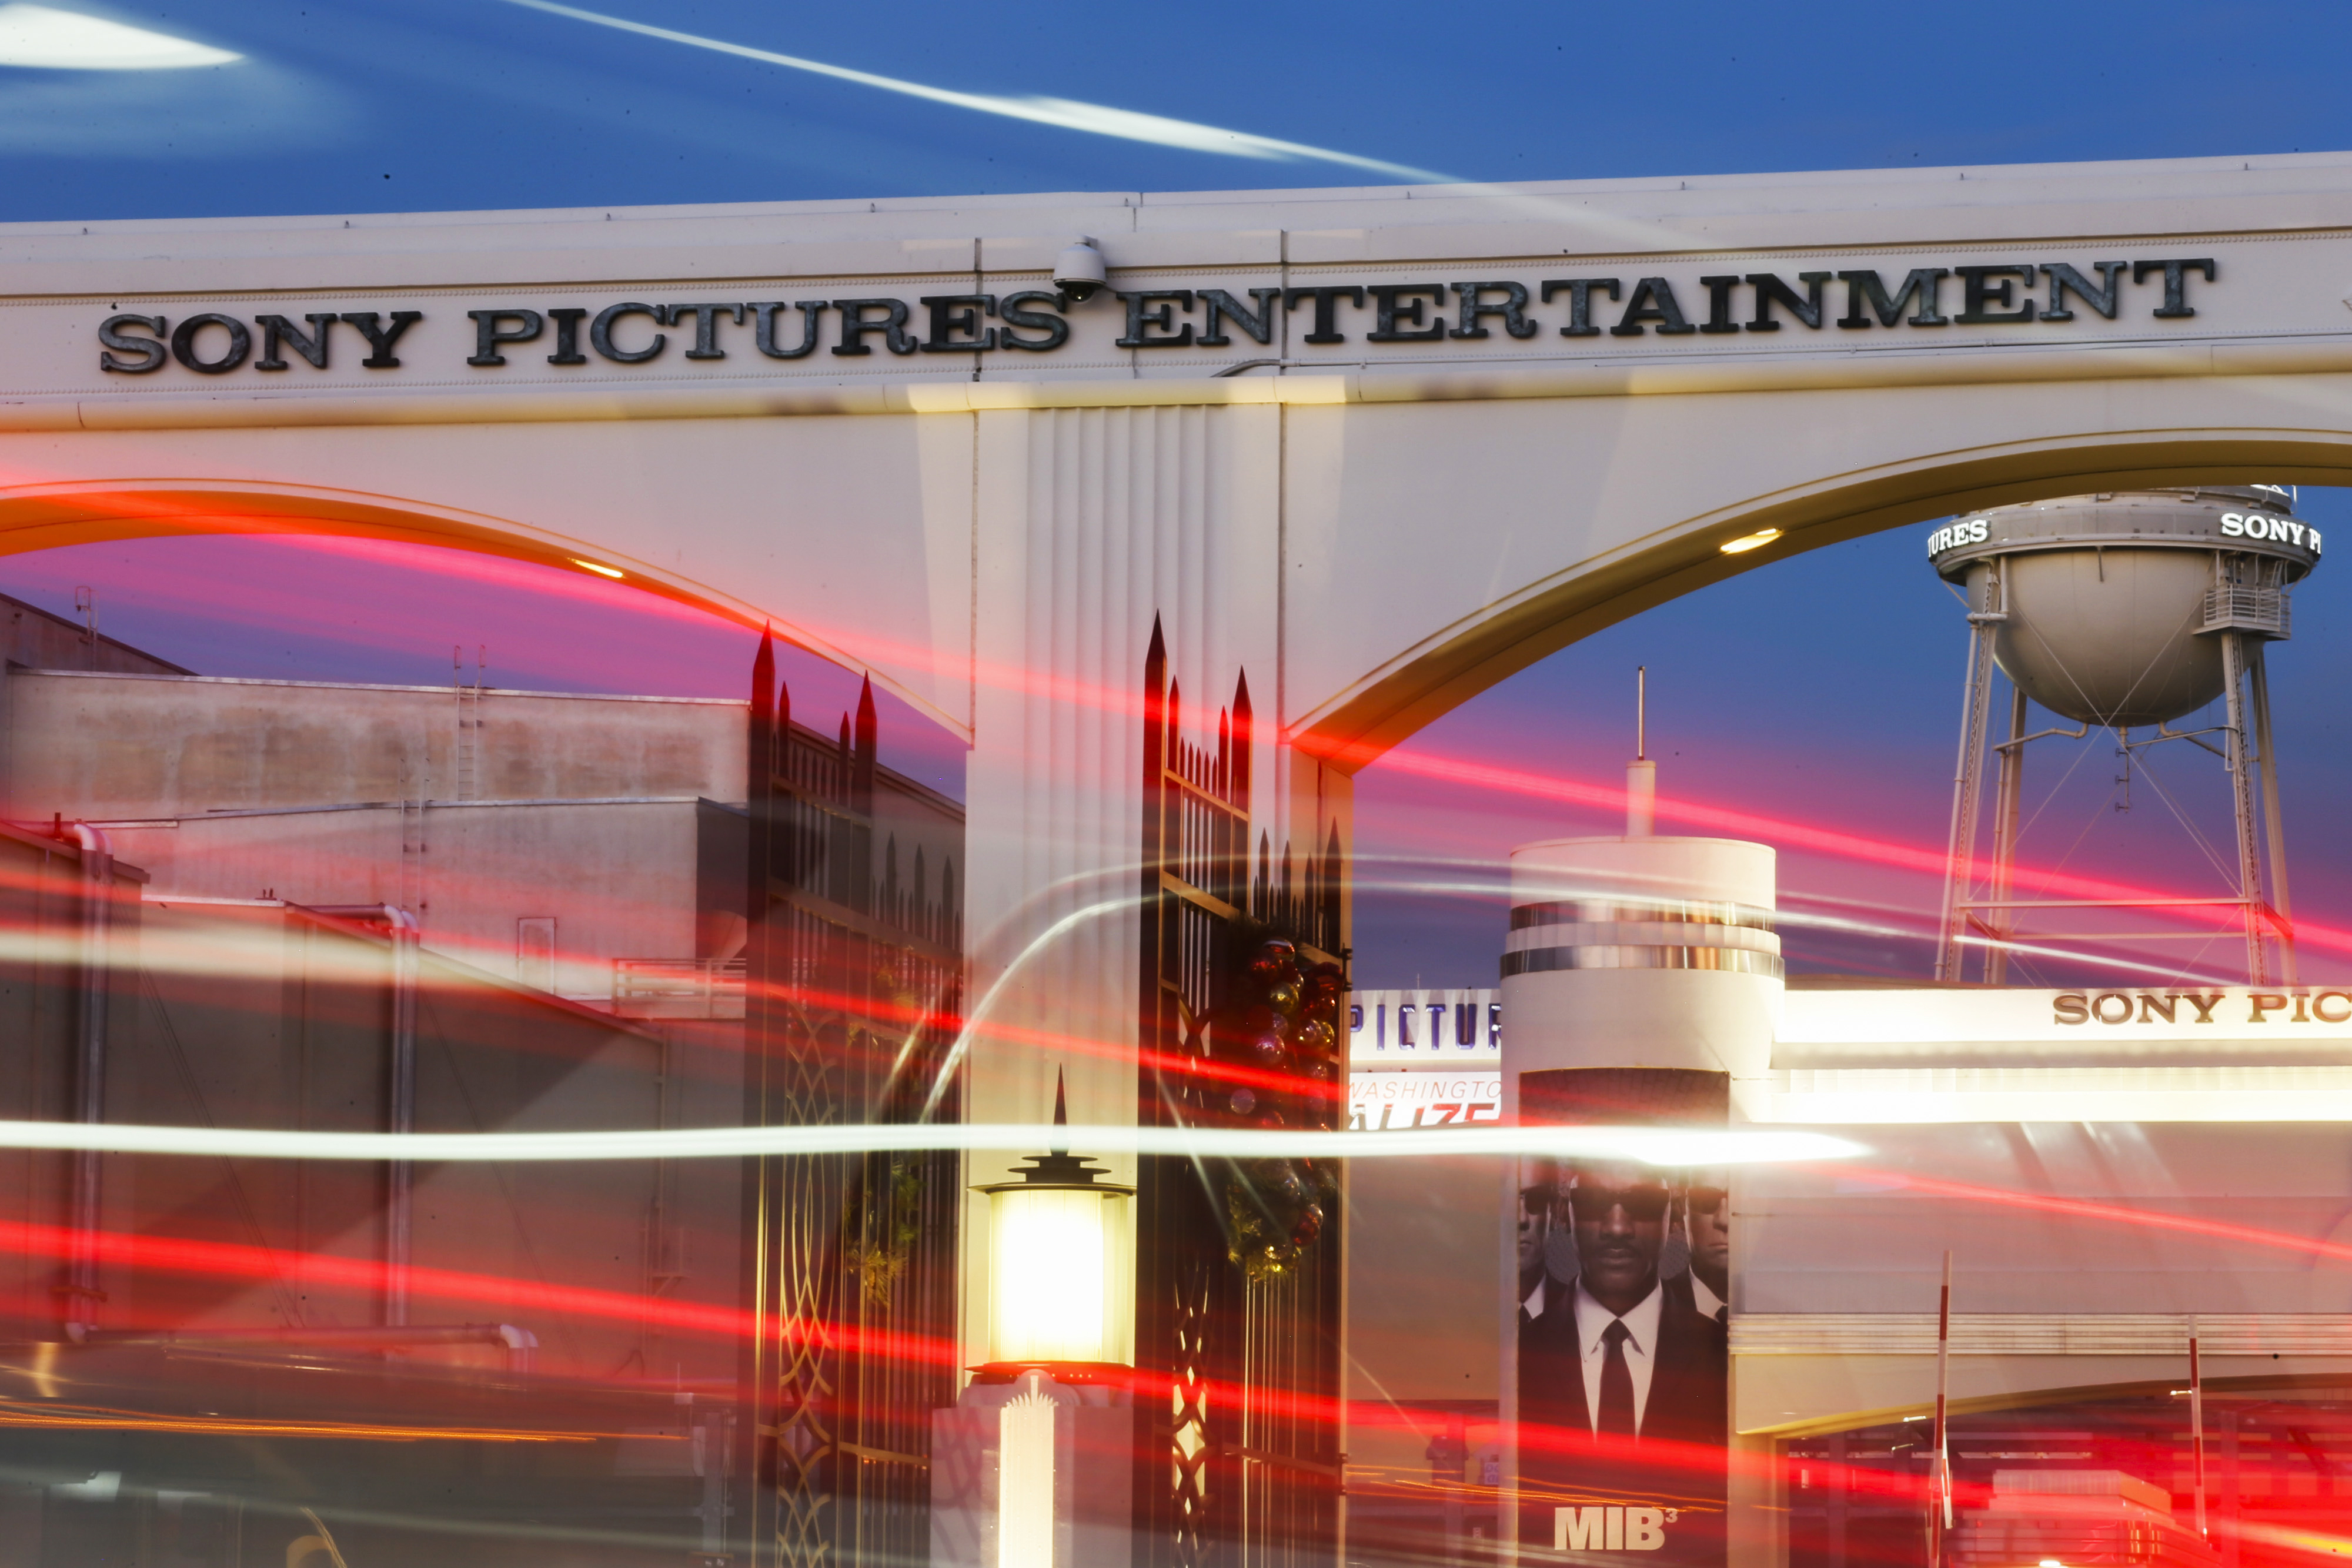 Signage is displayed at the Sony Pictures Entertainment Inc. studios in Culver City, California, U.S., on Thursday, Dec. 18, 2014, after an alleged hacking by North Korea of the company. (Patrick T. Fallon&mdash;Bloomberg/Getty Images)